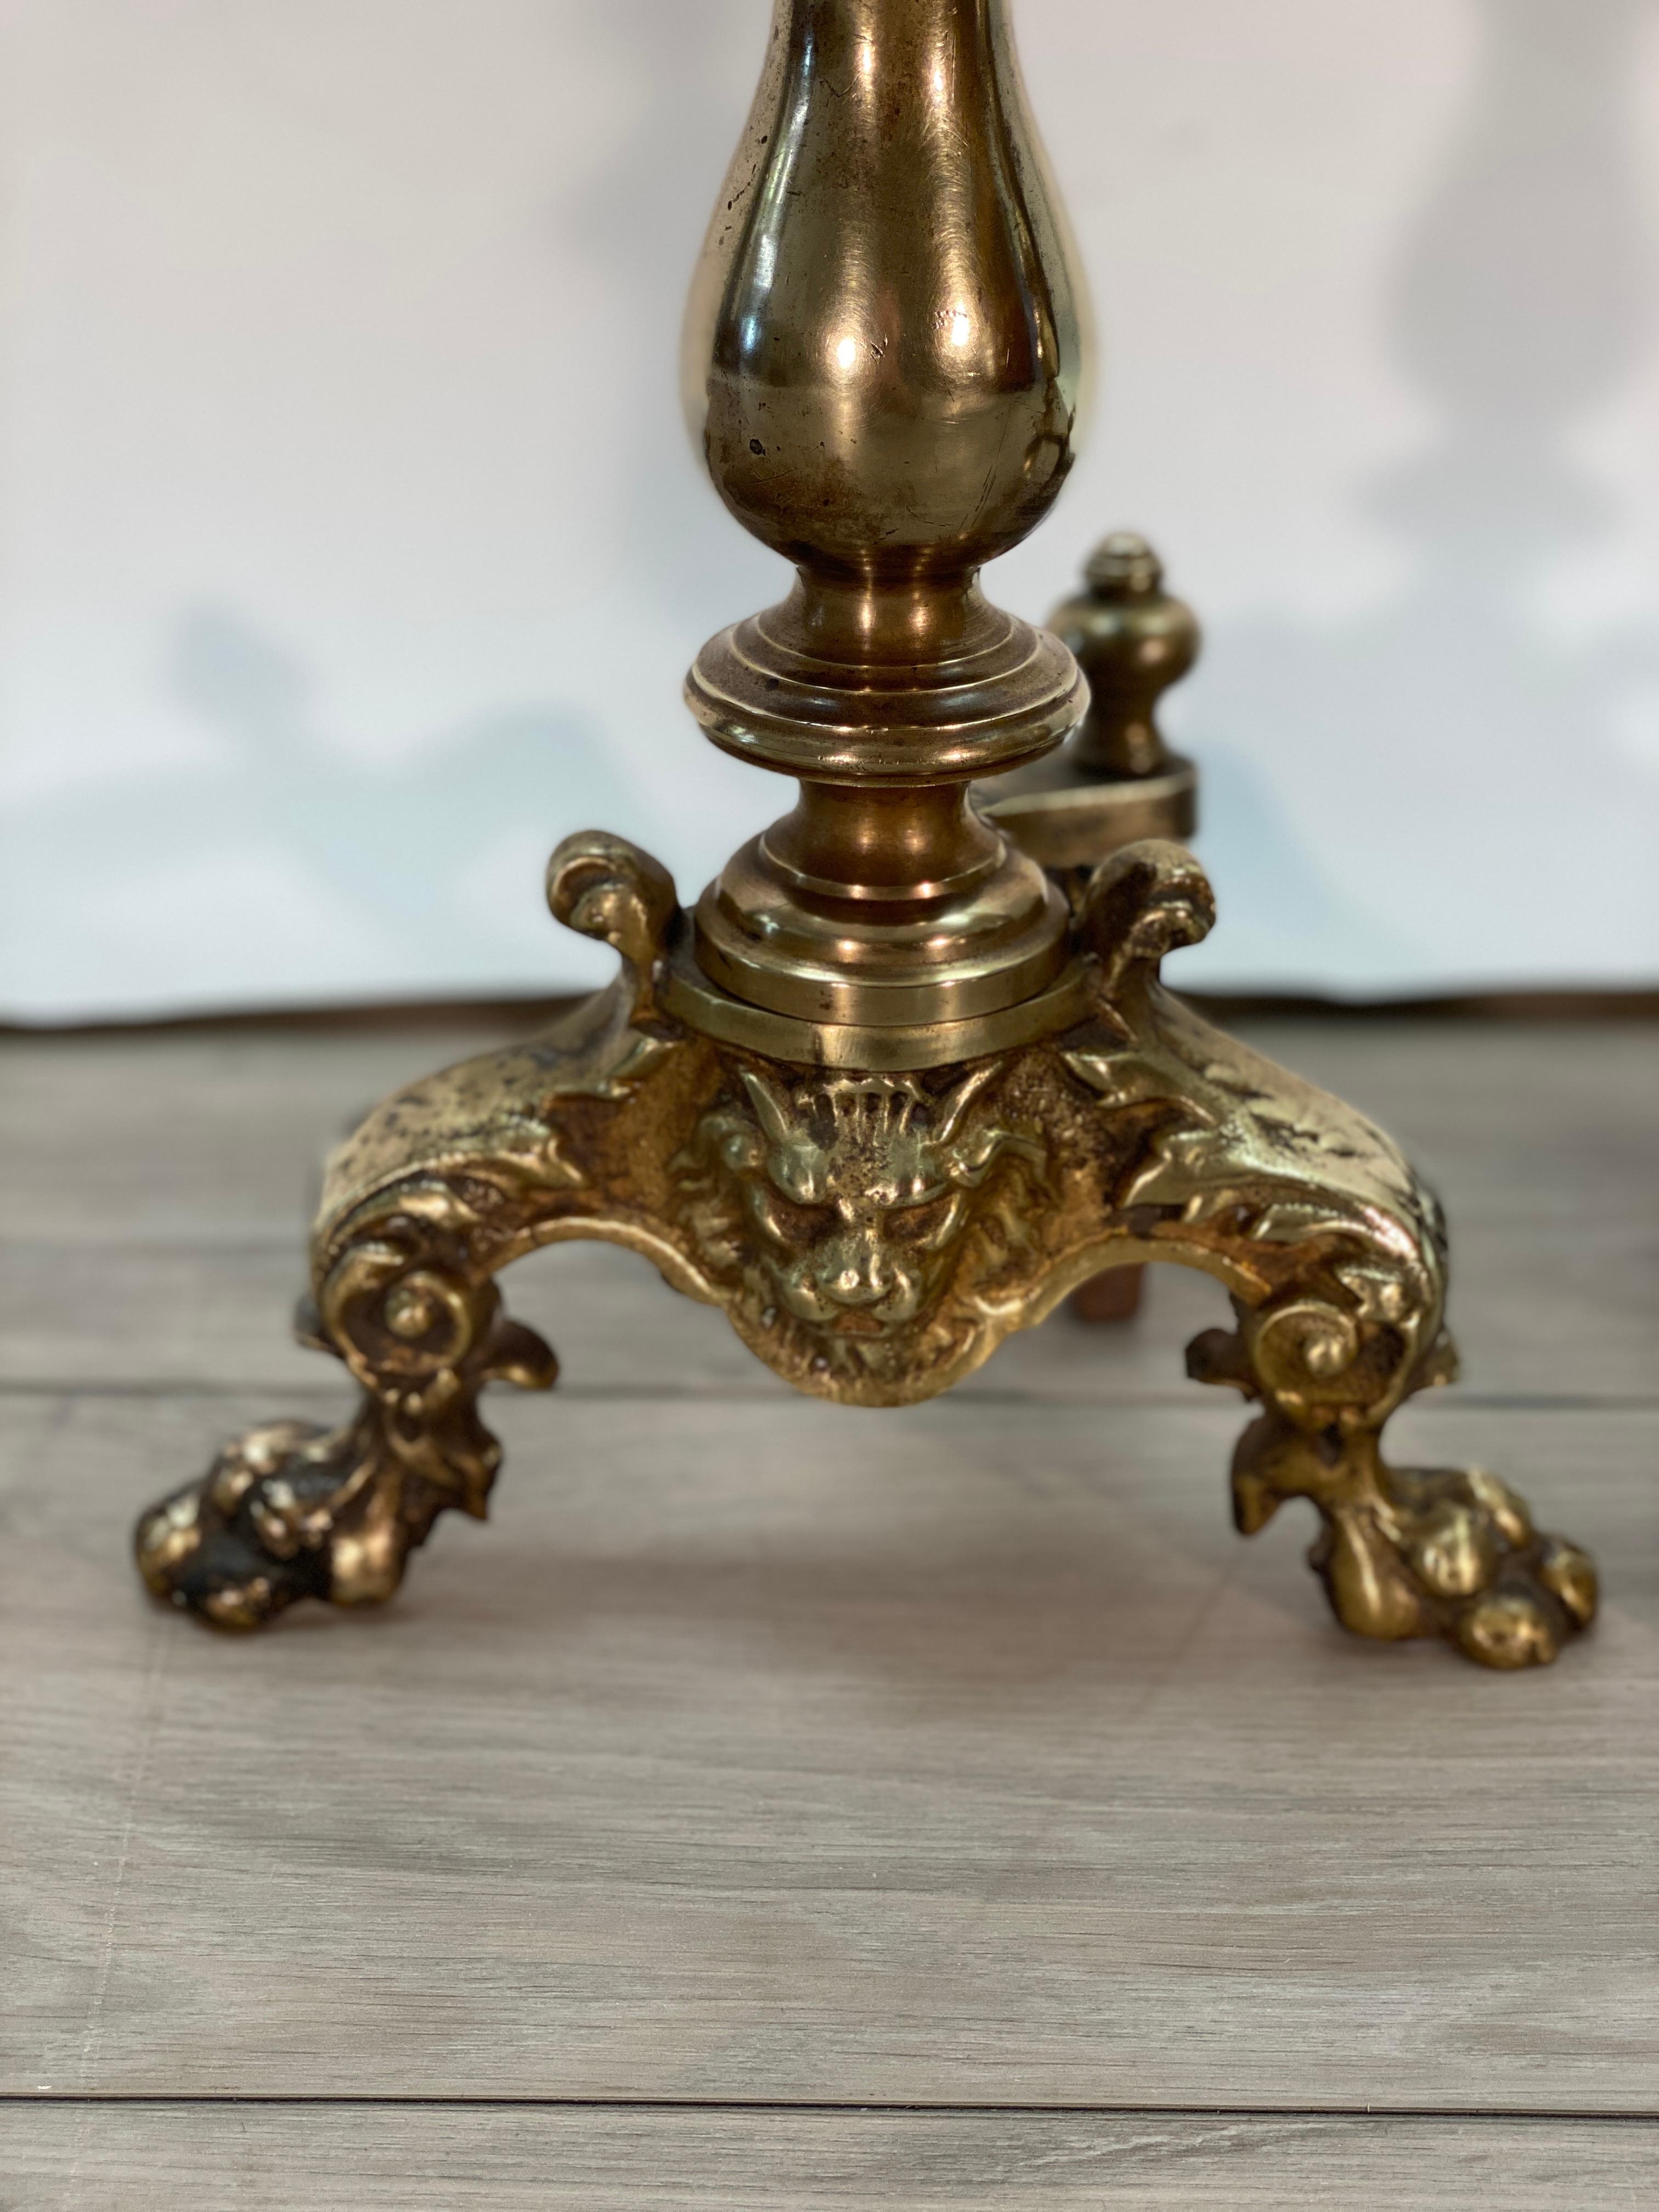 English brass andirons, Both resting on paw feet adorned with a central Lions face. The center rises with turned brass urn form terminating into spires. Very handsome and warm patina.